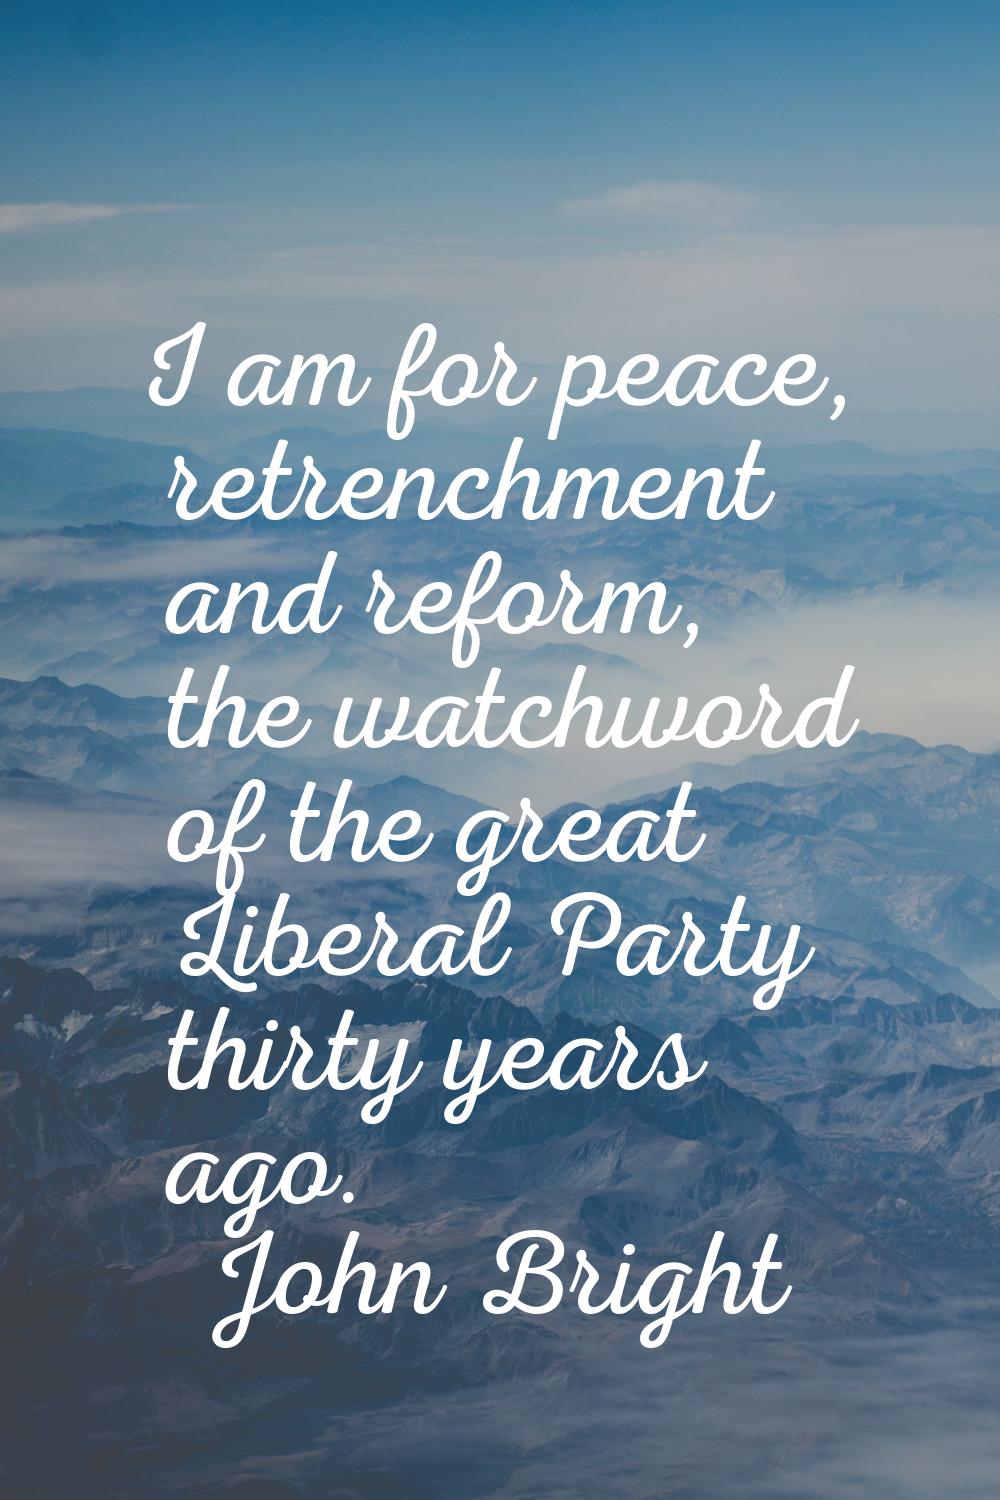 I am for peace, retrenchment and reform, the watchword of the great Liberal Party thirty years ago.